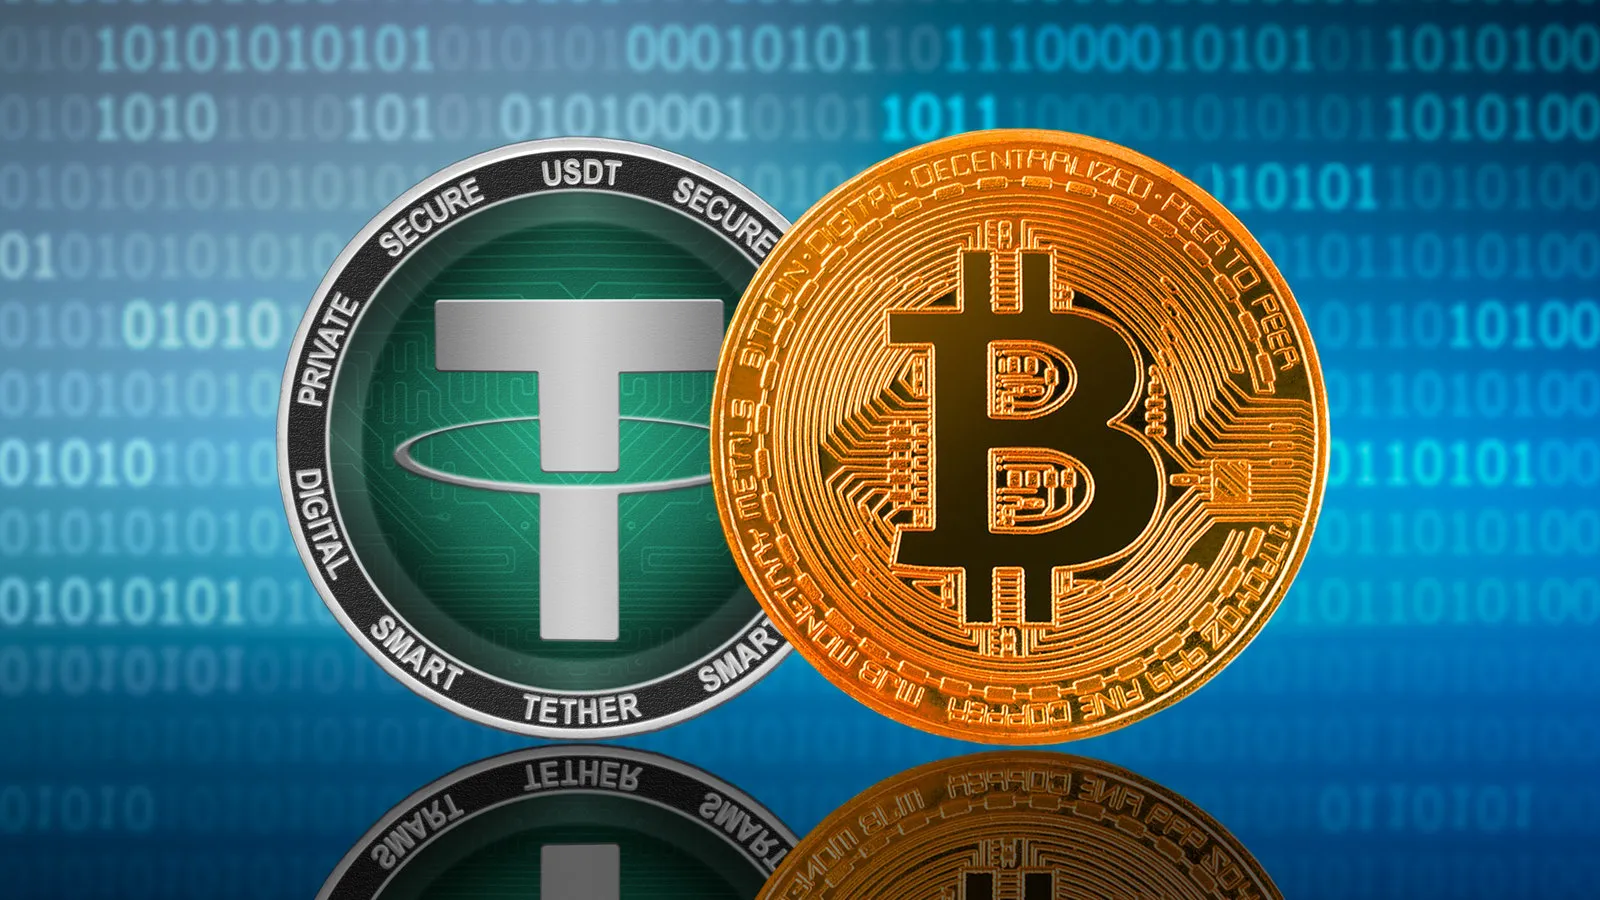 Tether has a higher trading volume than Bitcoin, Ethereum and XRP. Image: Shutterstock